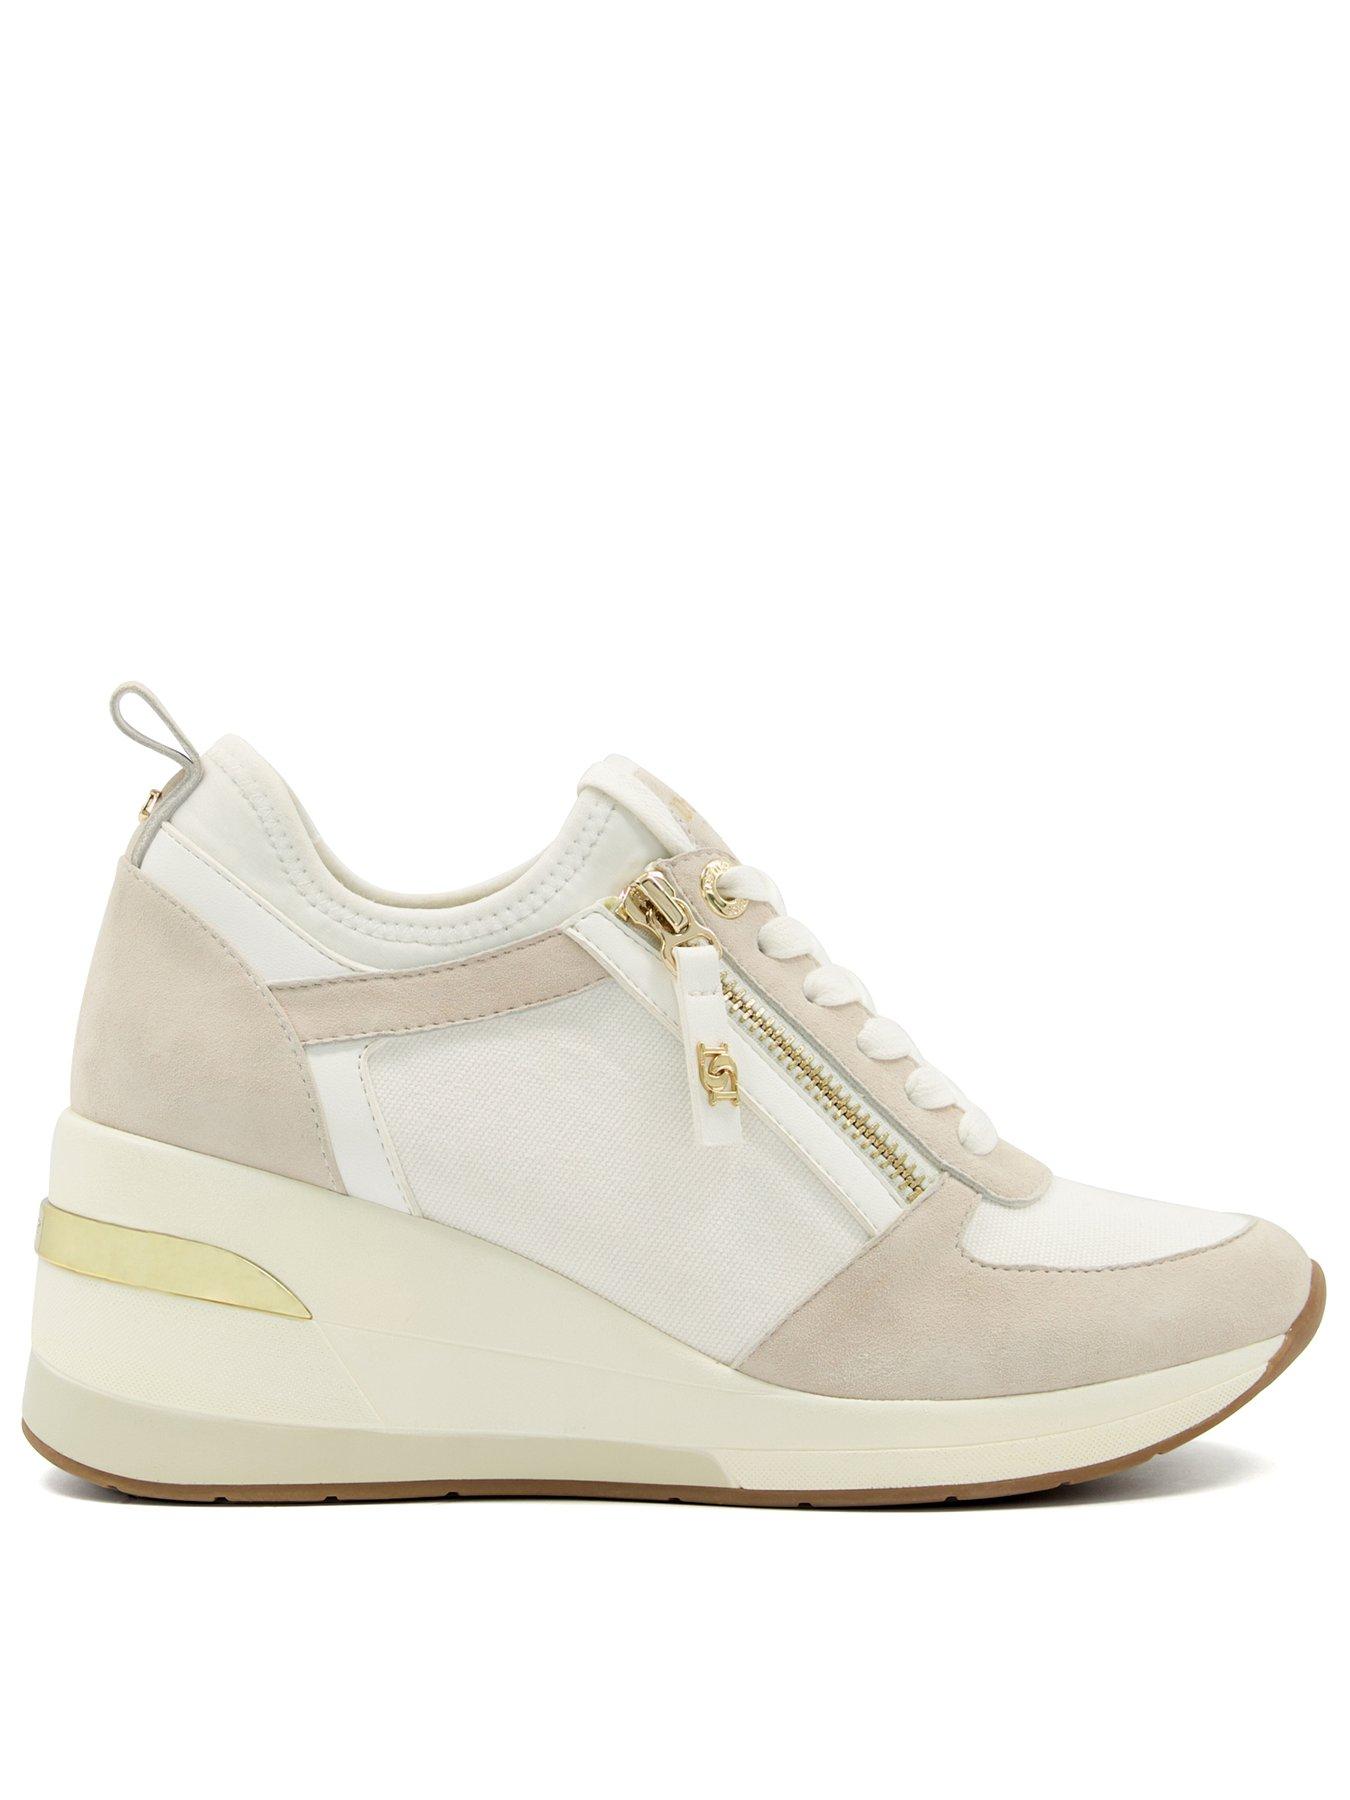 Dune London | Throne Trainers | White Leather | House of Fraser